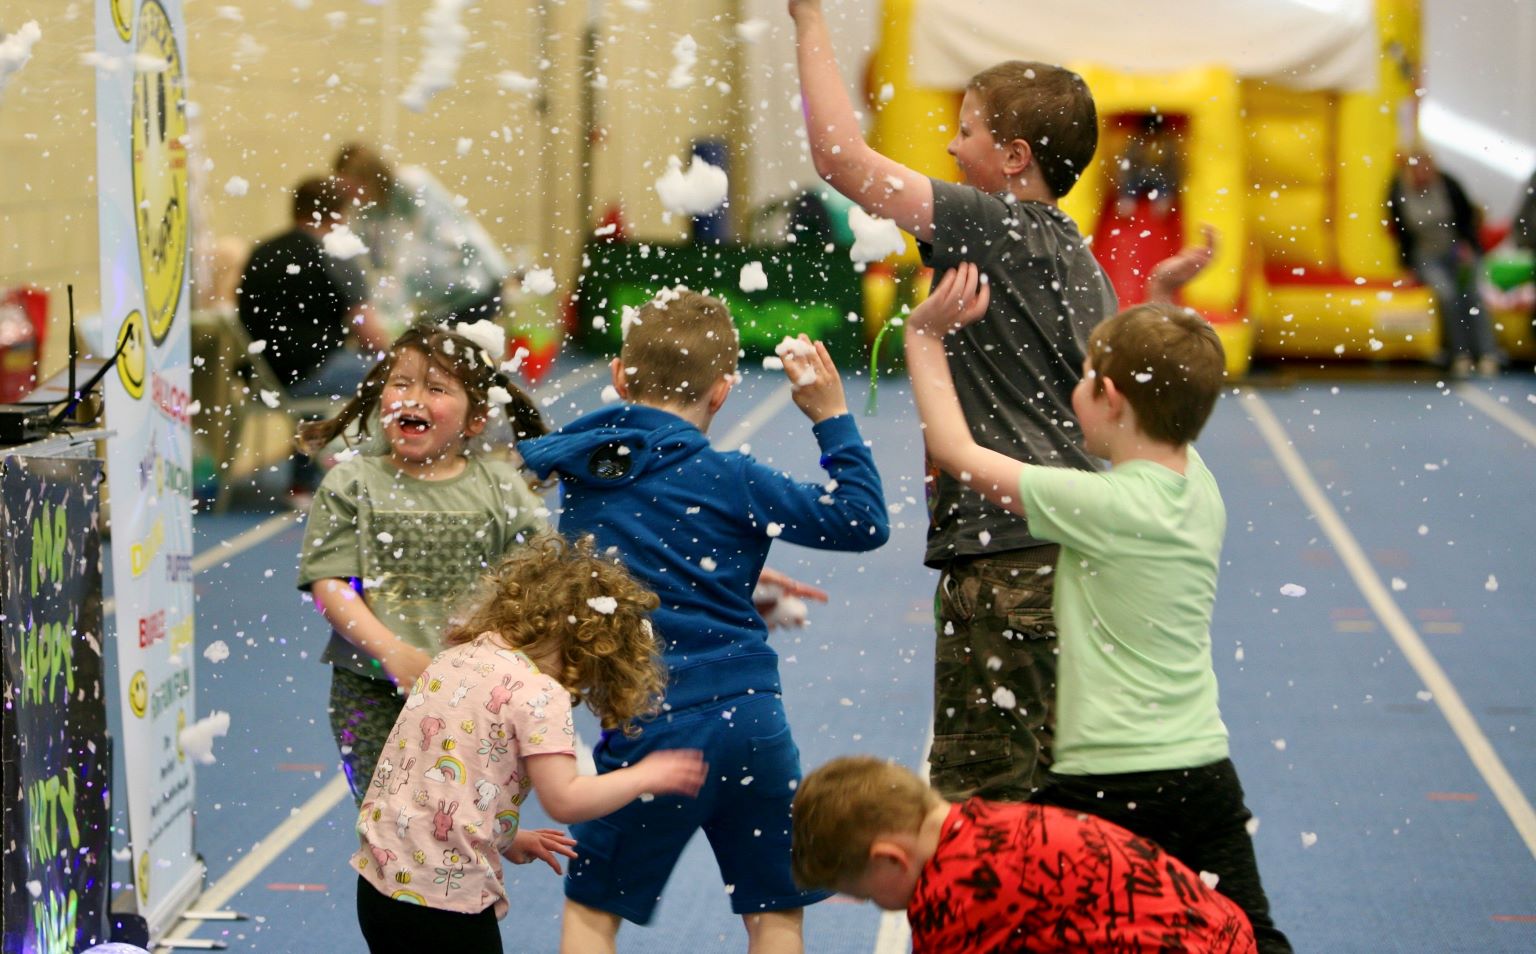 Five children are at a party in a sports centre. In the background there is a bouncy castle. They are laughing and enjoying themselves. Some are jumping up and down and waving their arms. They are catching snow from a snow machine.